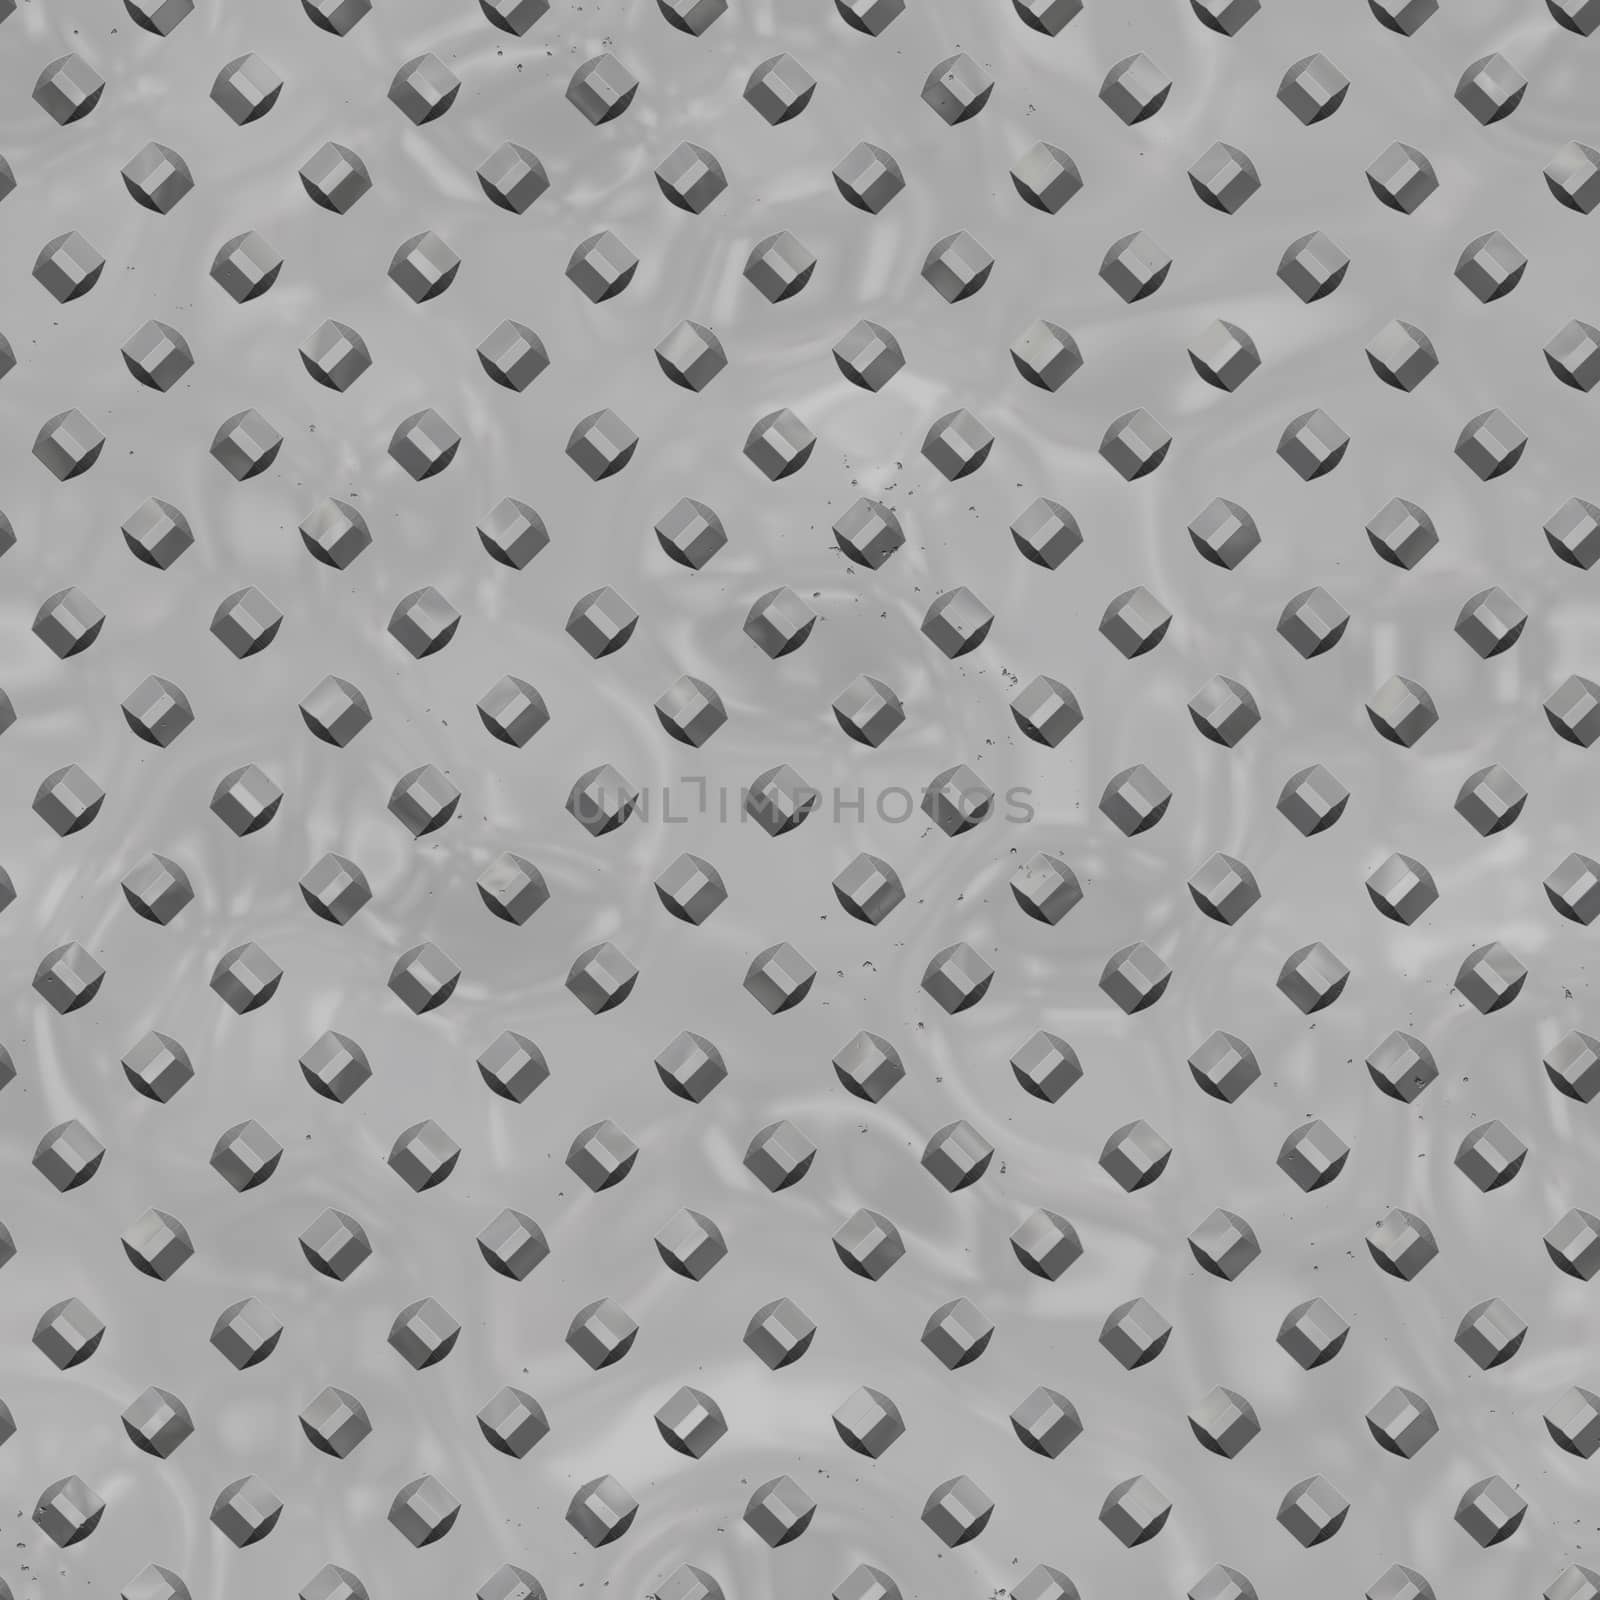 Grunge Gray Metal Plate Seamless Texture by whitechild